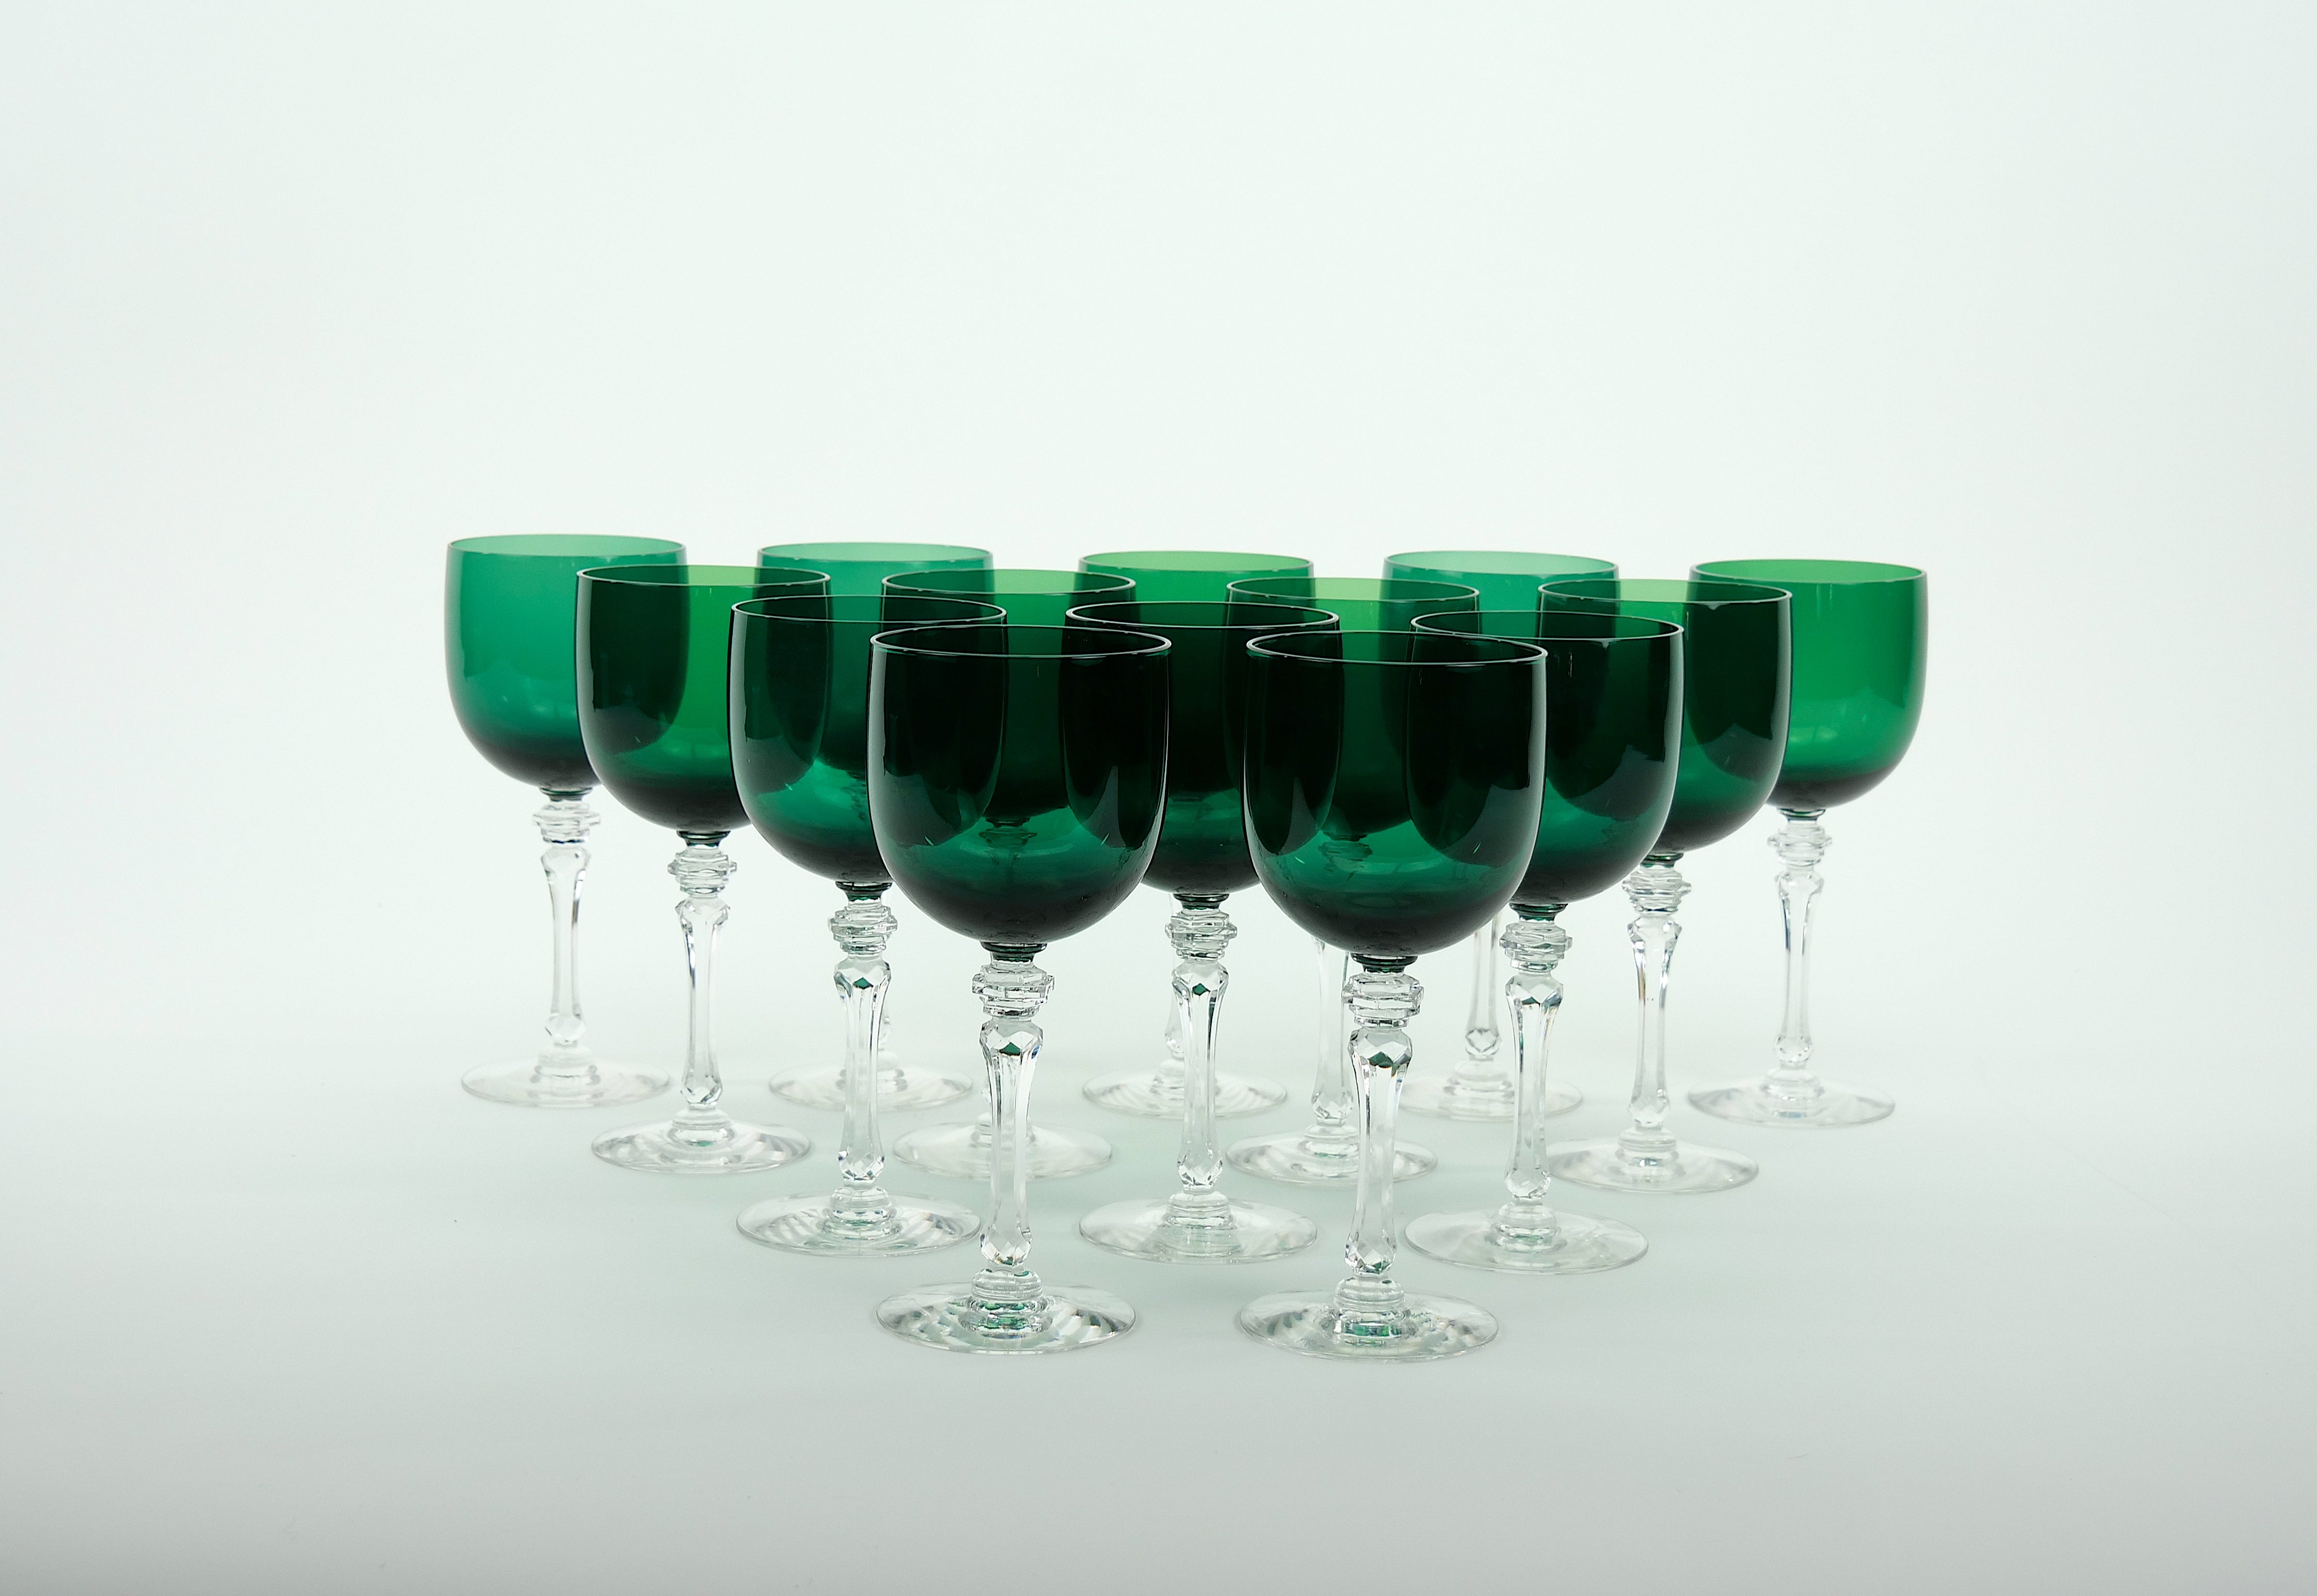 Exquisite holiday green colored crystal with clear cut stem early 20th century Franciscan tableware / barware wine and water glassware service for 14 people. Each glass is in excellent vintage condition. Each glass measures 7.75 inches tall and 3